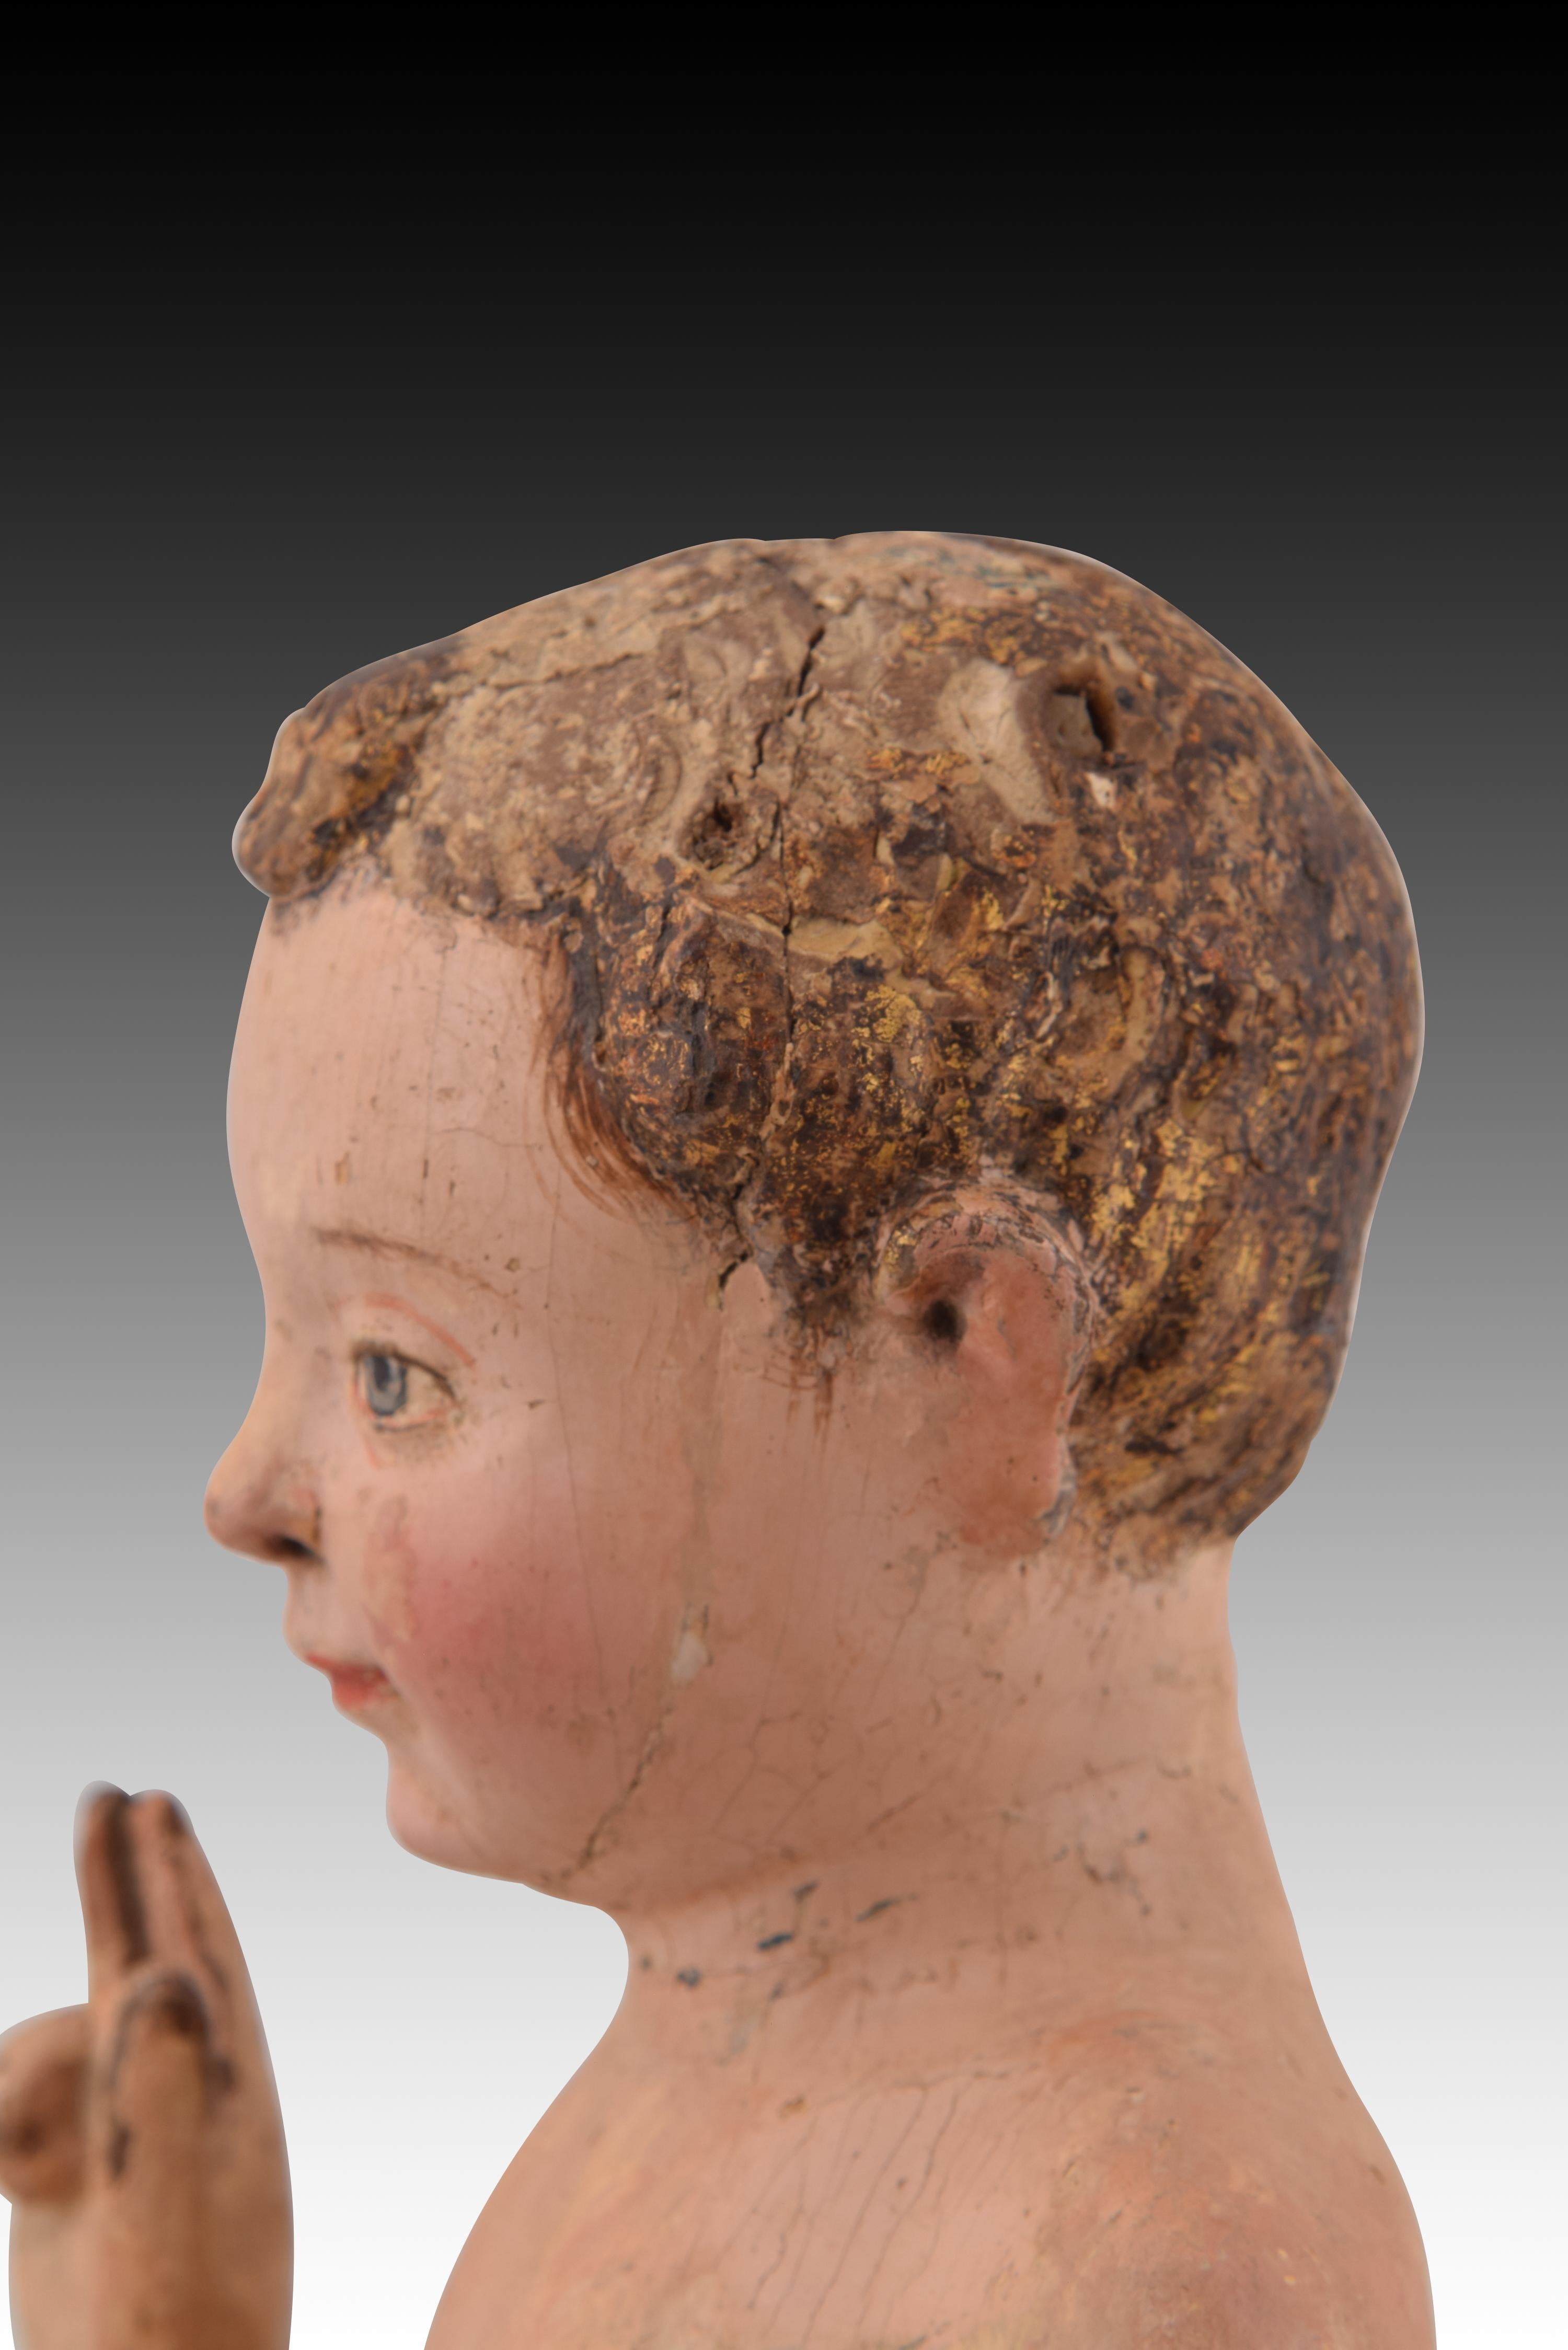 Christ Child blessing. Wood. Flemish school, 16th century with restorations. 3